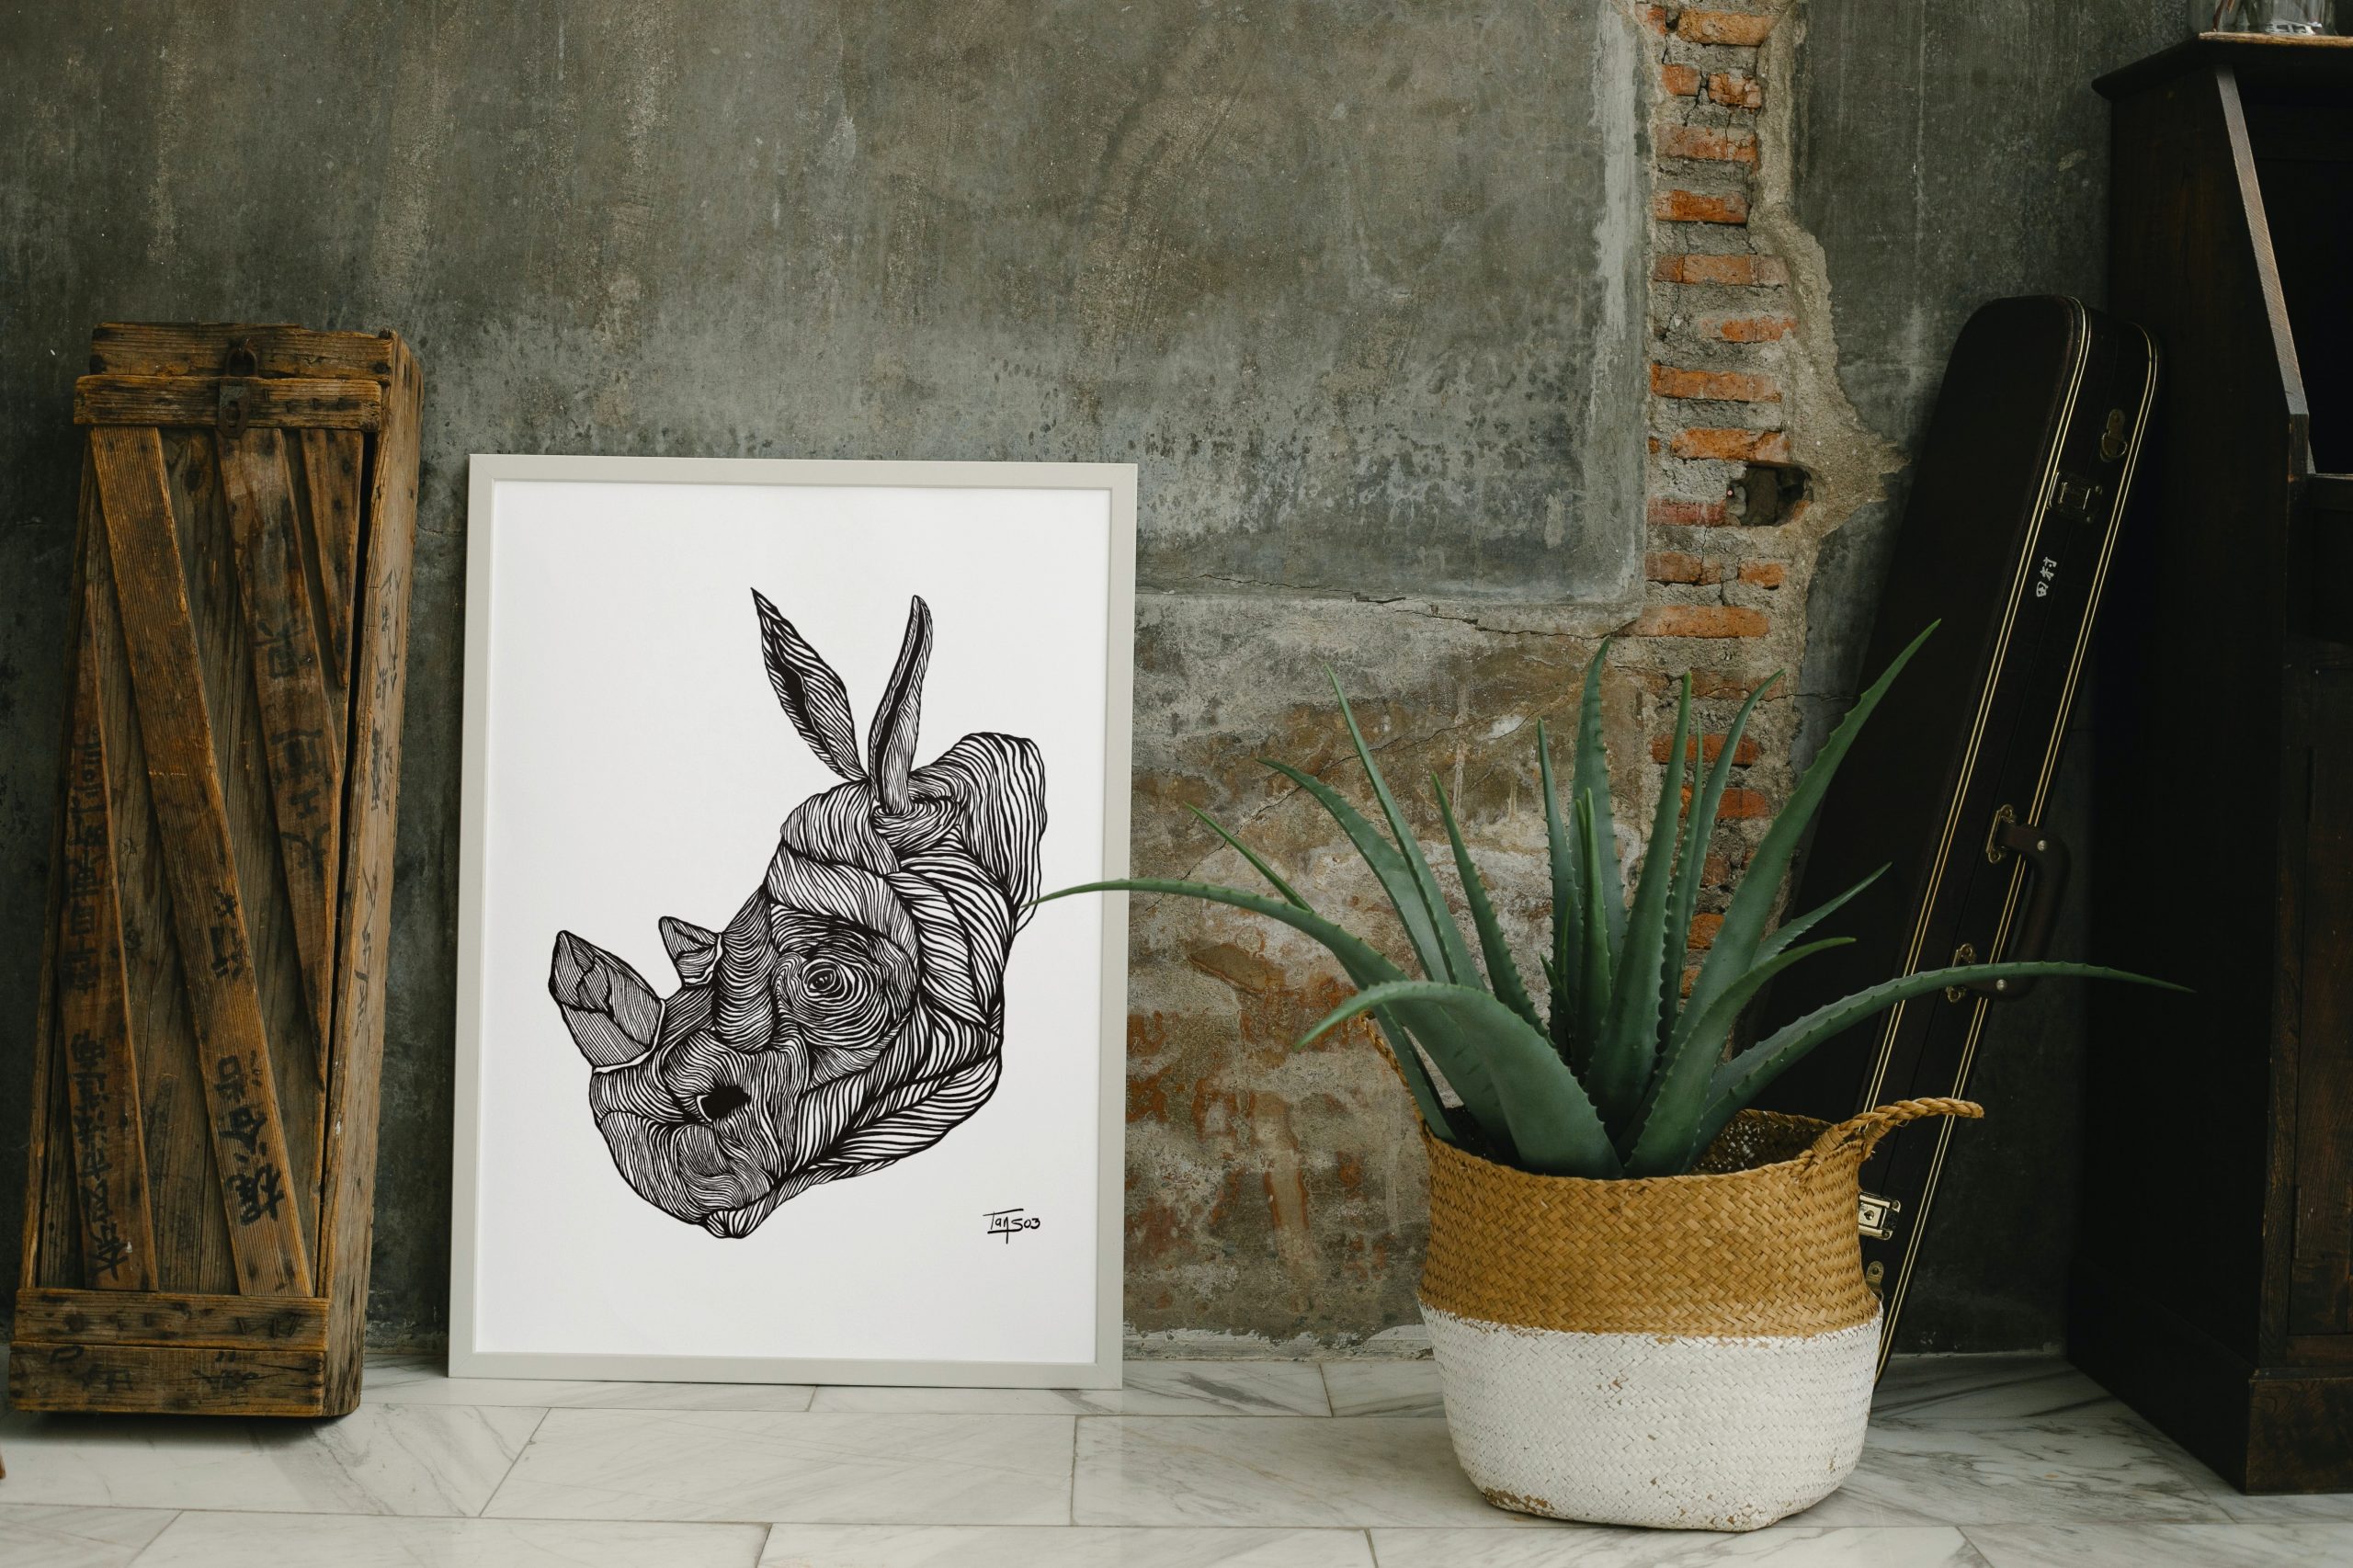 black hippo pigment liner painting print by Tania Sotres tanso3, art, animal, illustration, hippotamus, home decor, wall art, gift, portrait (1)